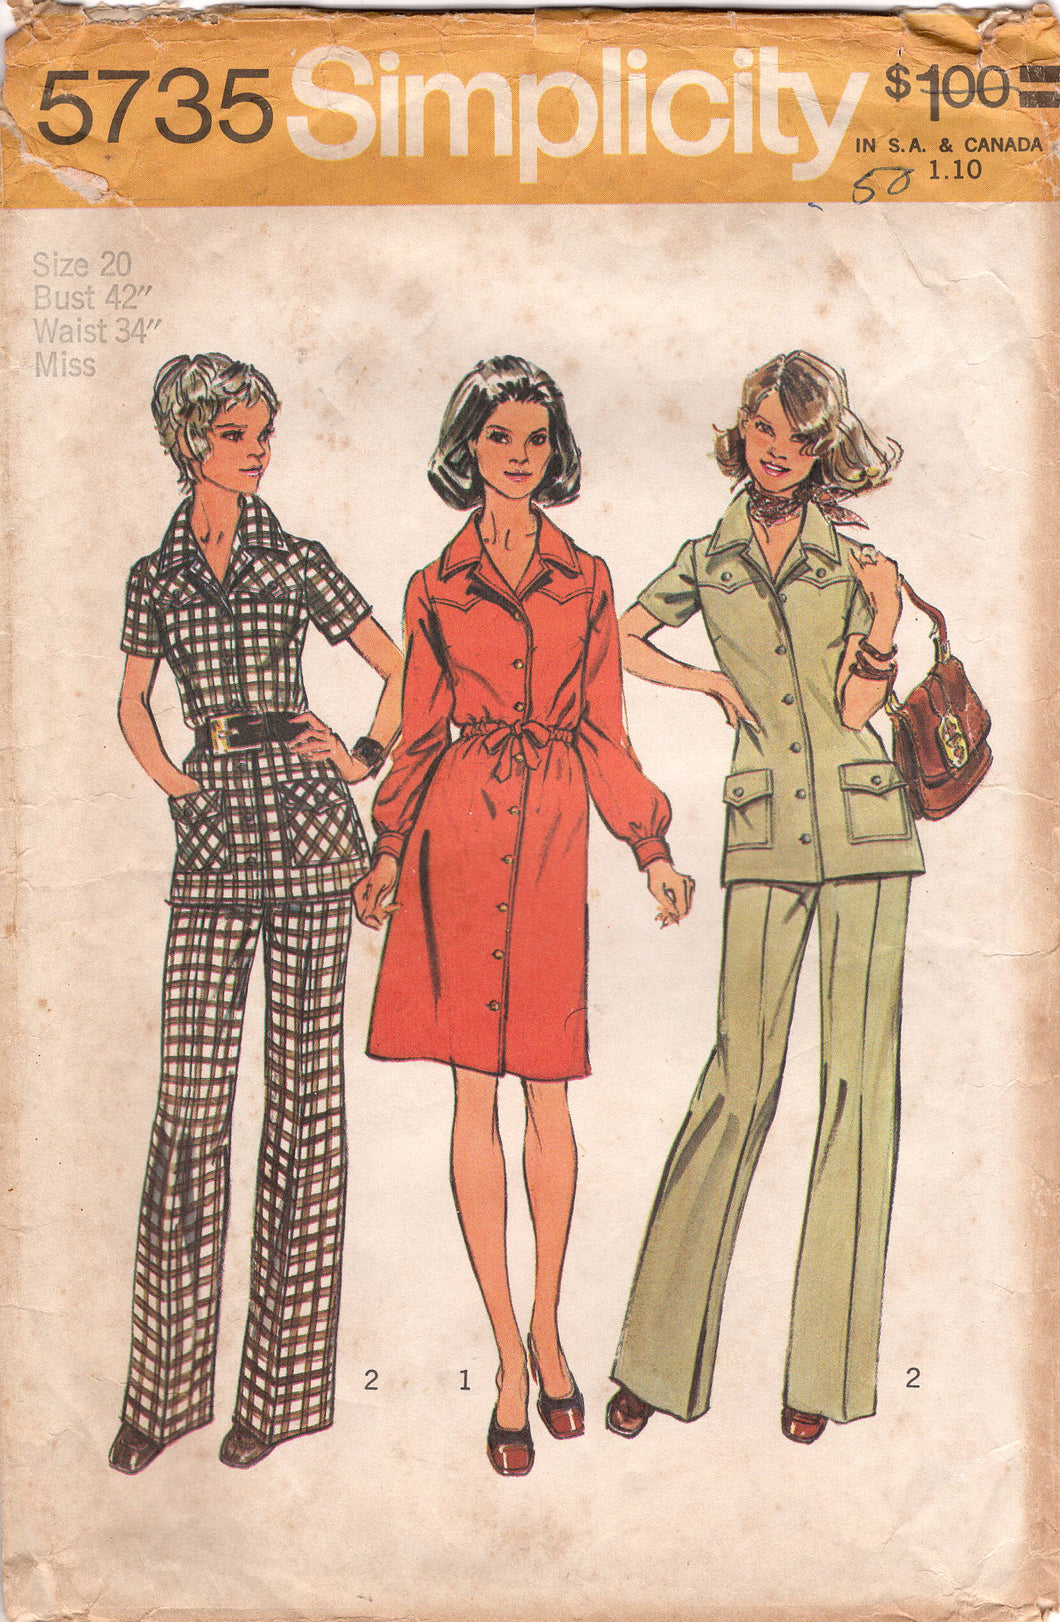 1970's Simplicity Western Style Shirt or Tunic Pattern and Pants Pattern  - Bust 42